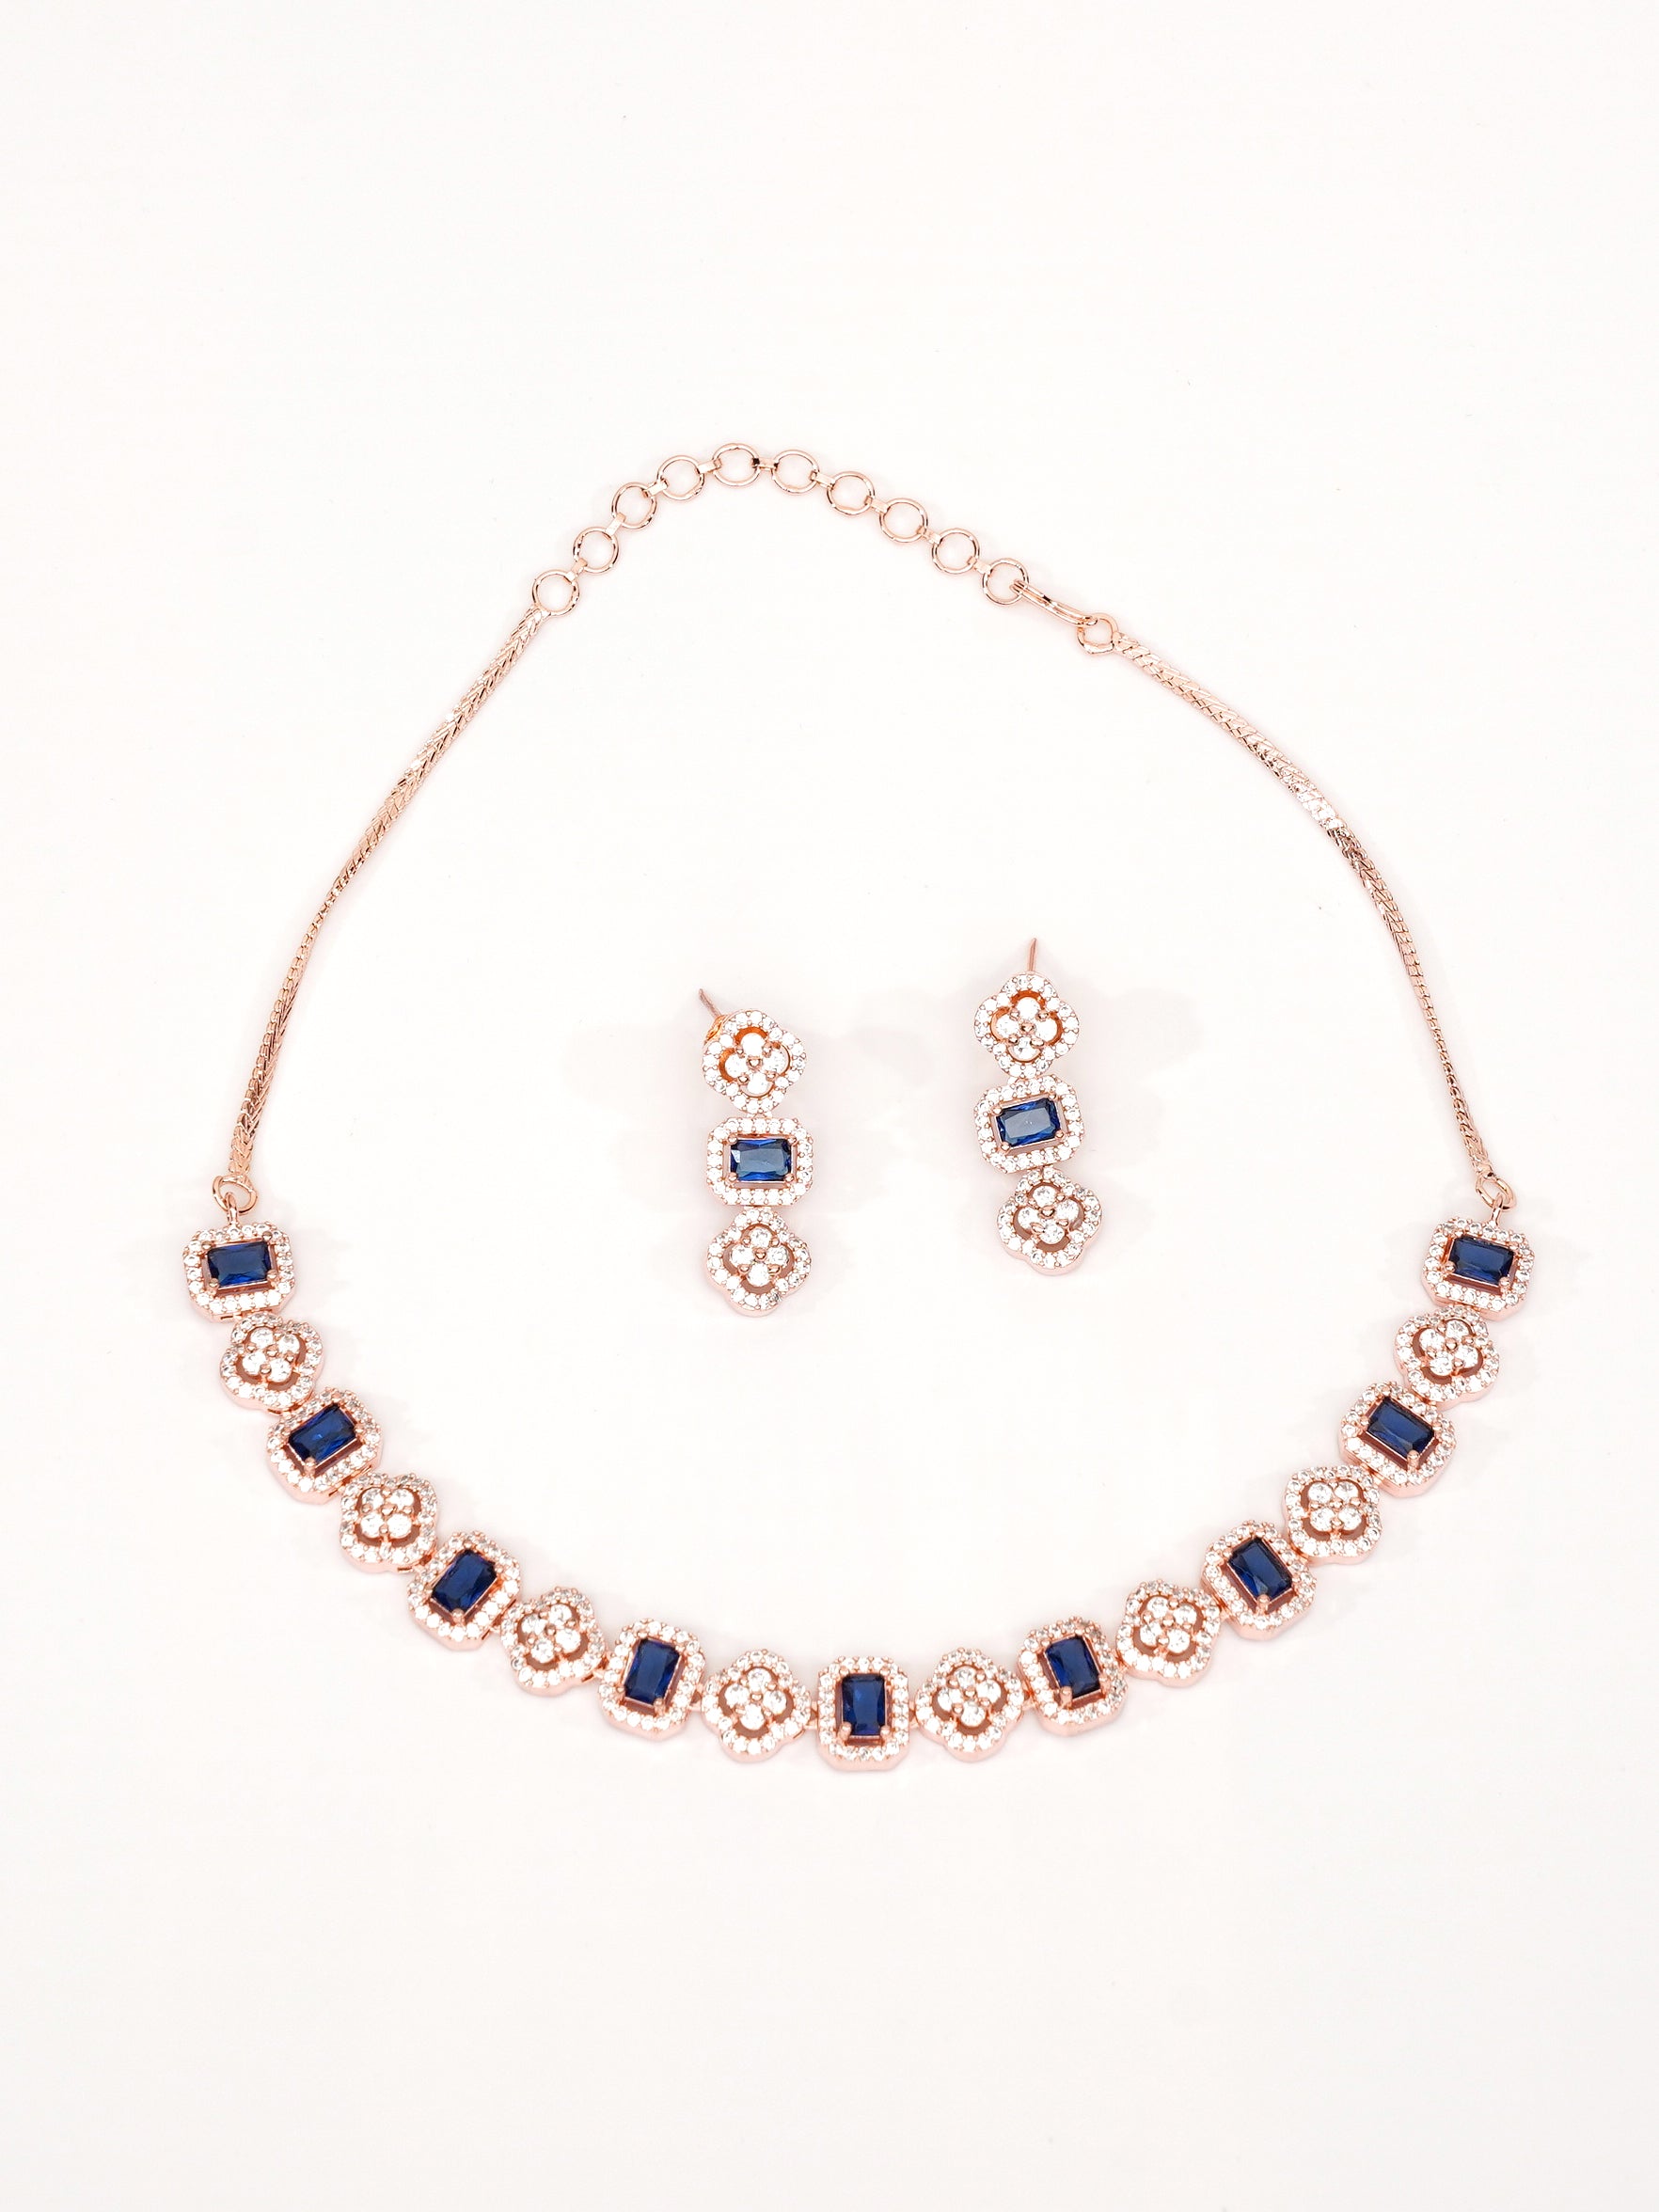 Premium Sayara Collection White Gold Plated Necklace set with Top quality Blue CZ Stone 8815N